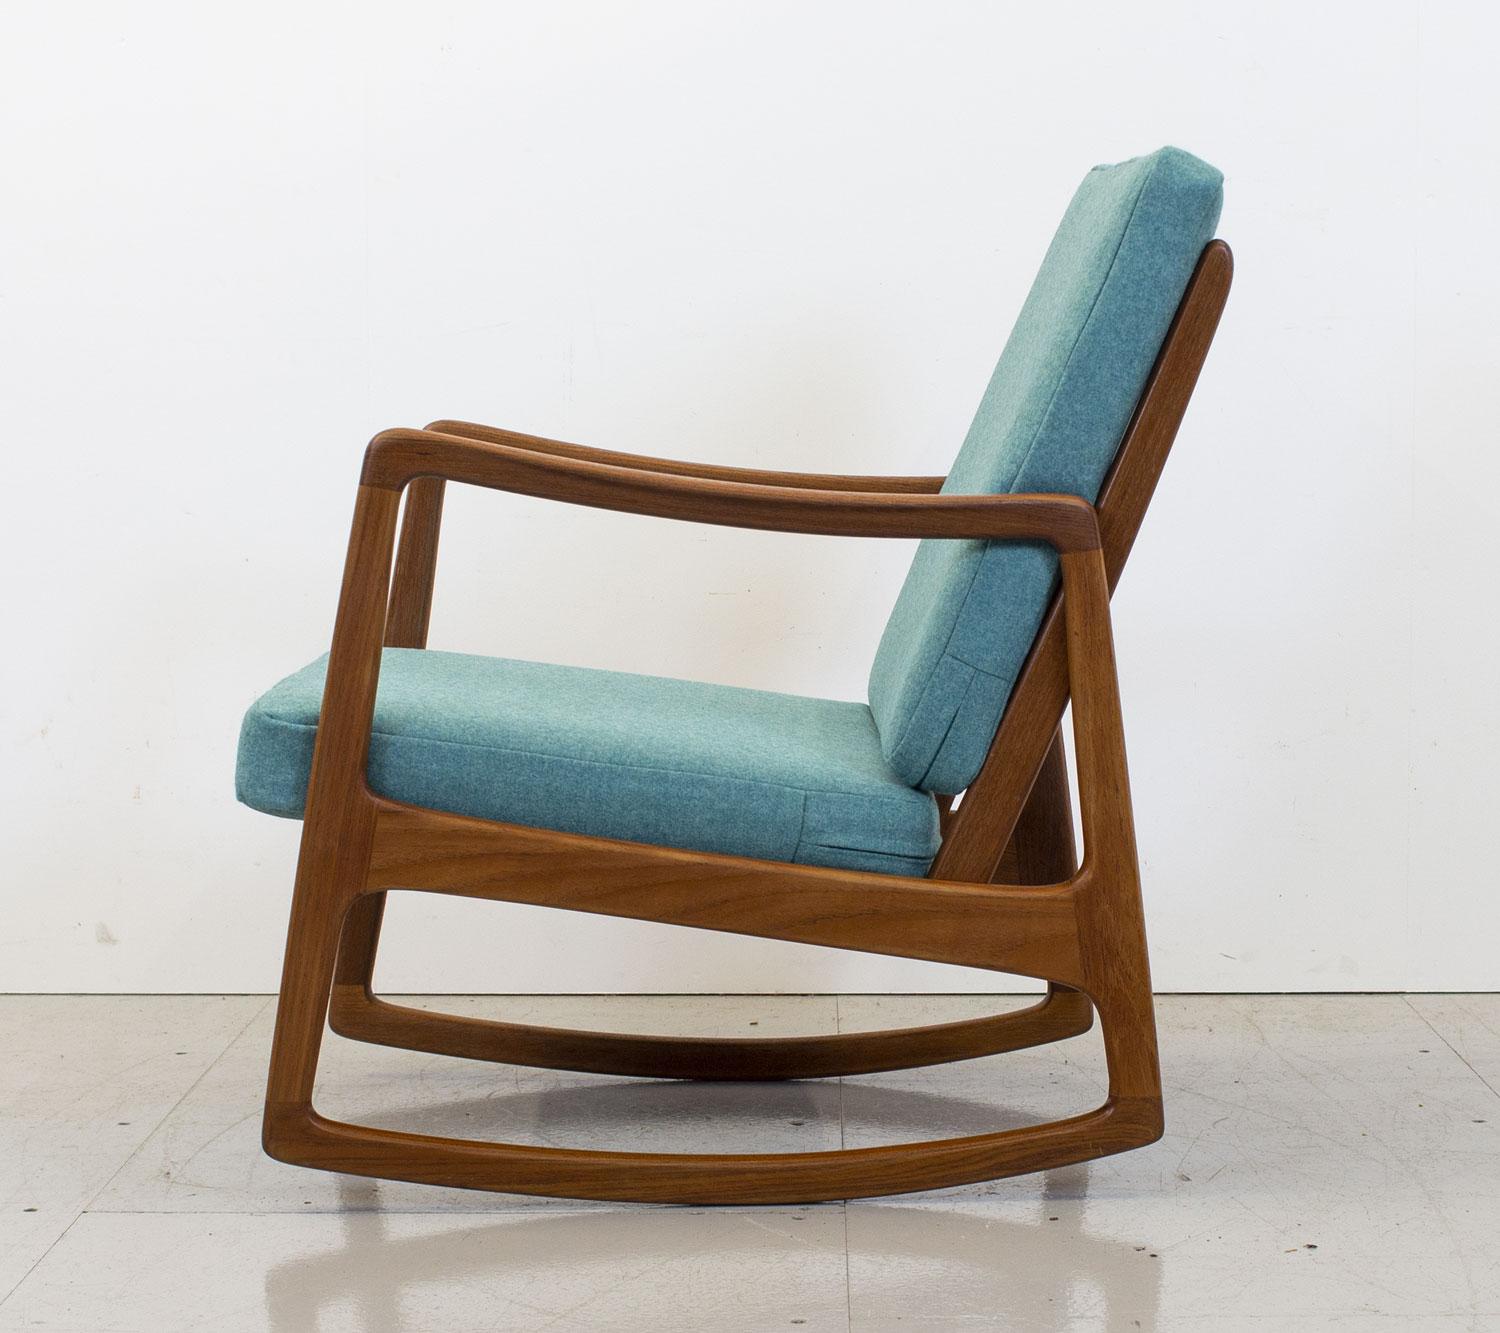 Danish teak model FD120 rocking chair designed by Ole Wanscher for France & Son in the early 1950s. Made from solid teak it’s clean lines and simple elegance were features Ole Wanscher was known for.